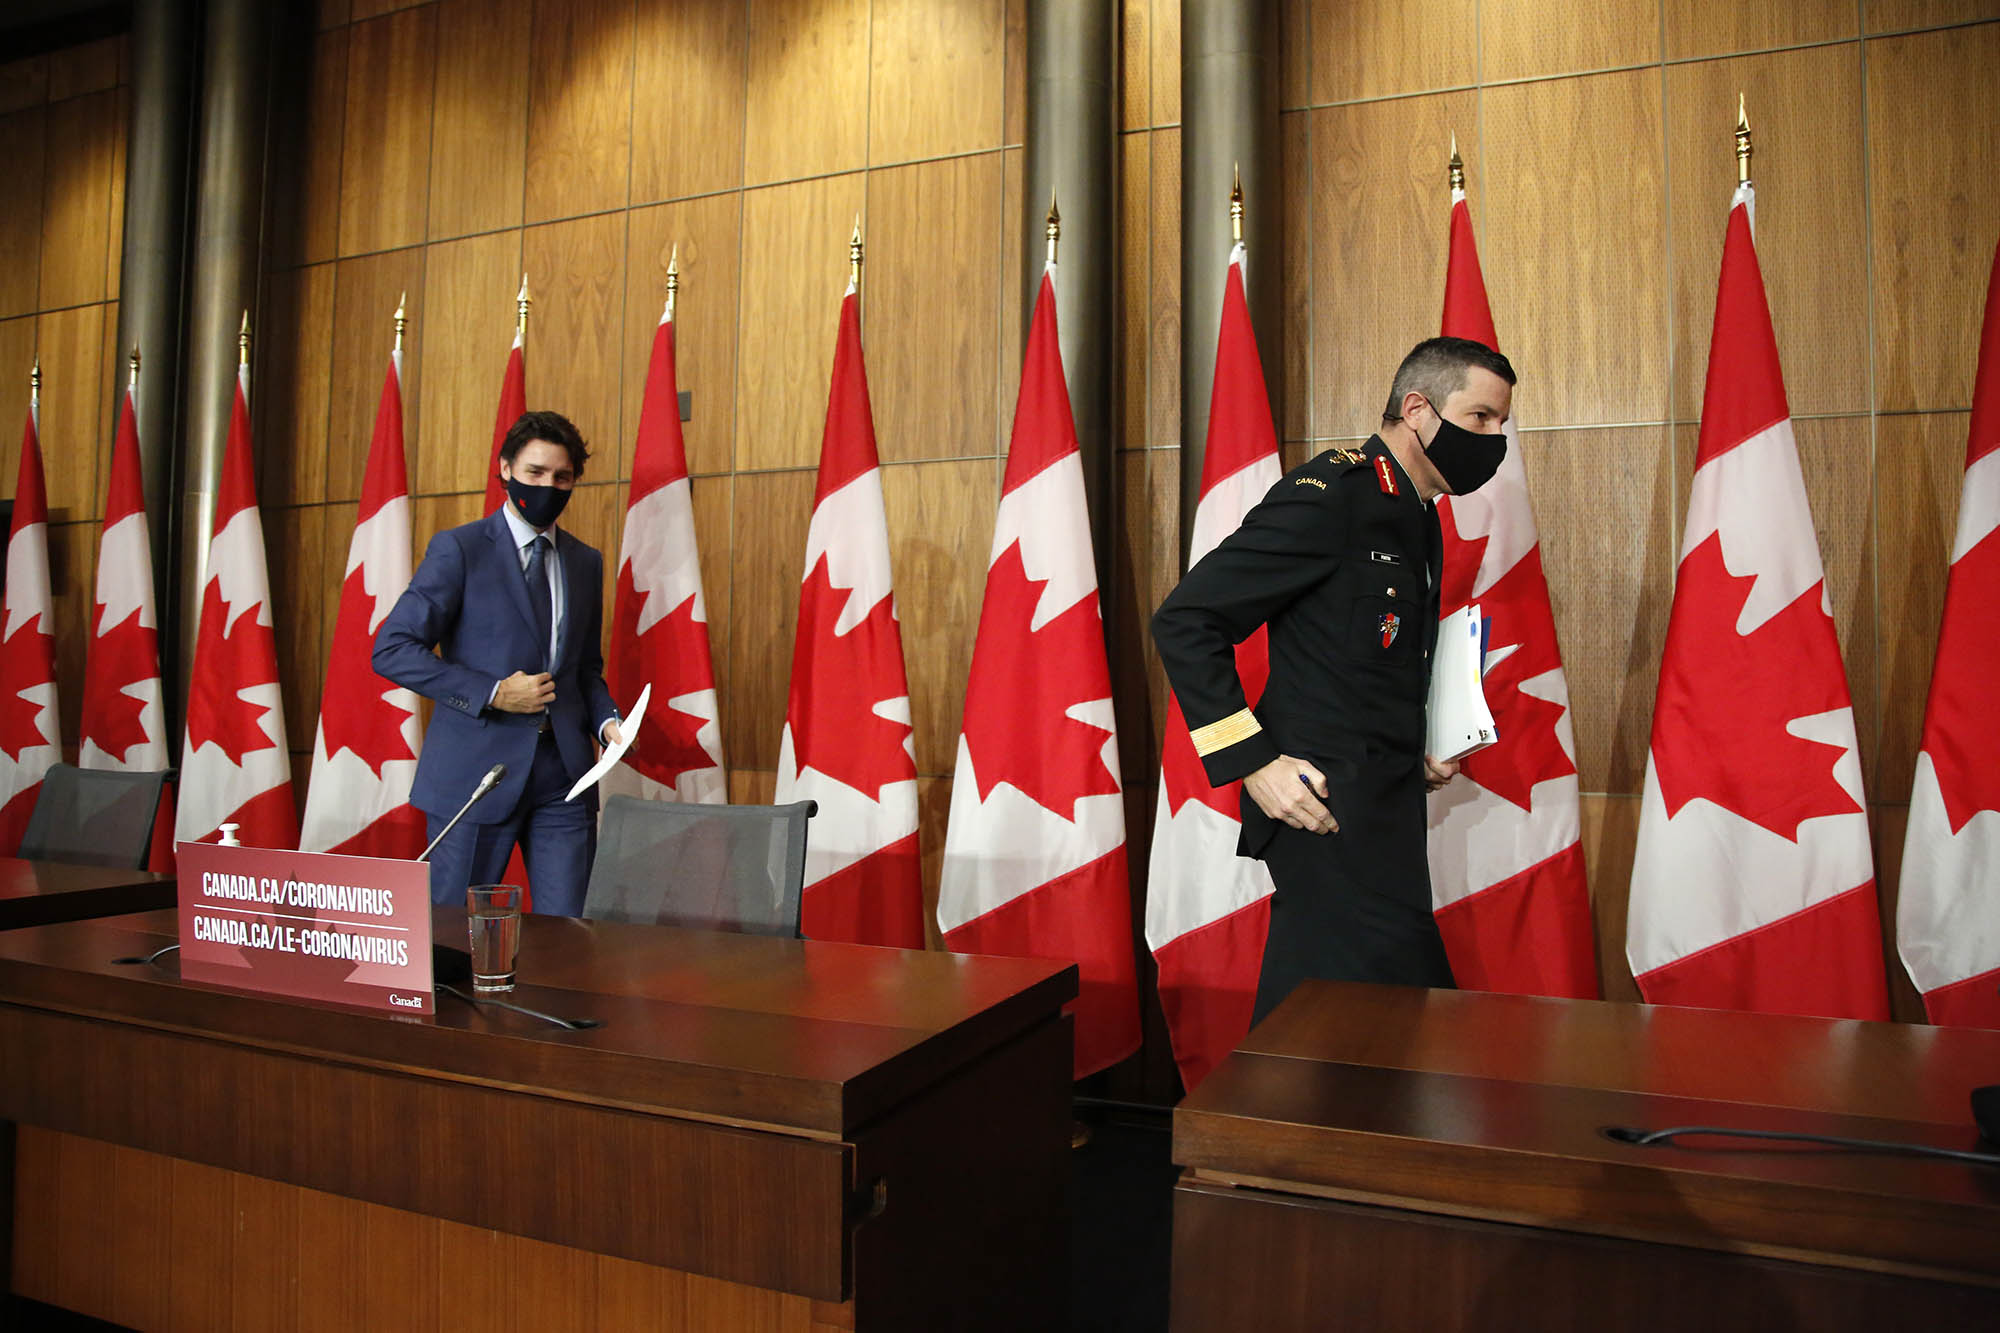 Canada prime minister Justin Trudeau, left, and Major General Dany Fortin, vice president of logistics and operations at Public Health Agency of Canada (PHAC), depart following a news conference in Ottawa, Ontario, Canada, on Thursday, December 10. 